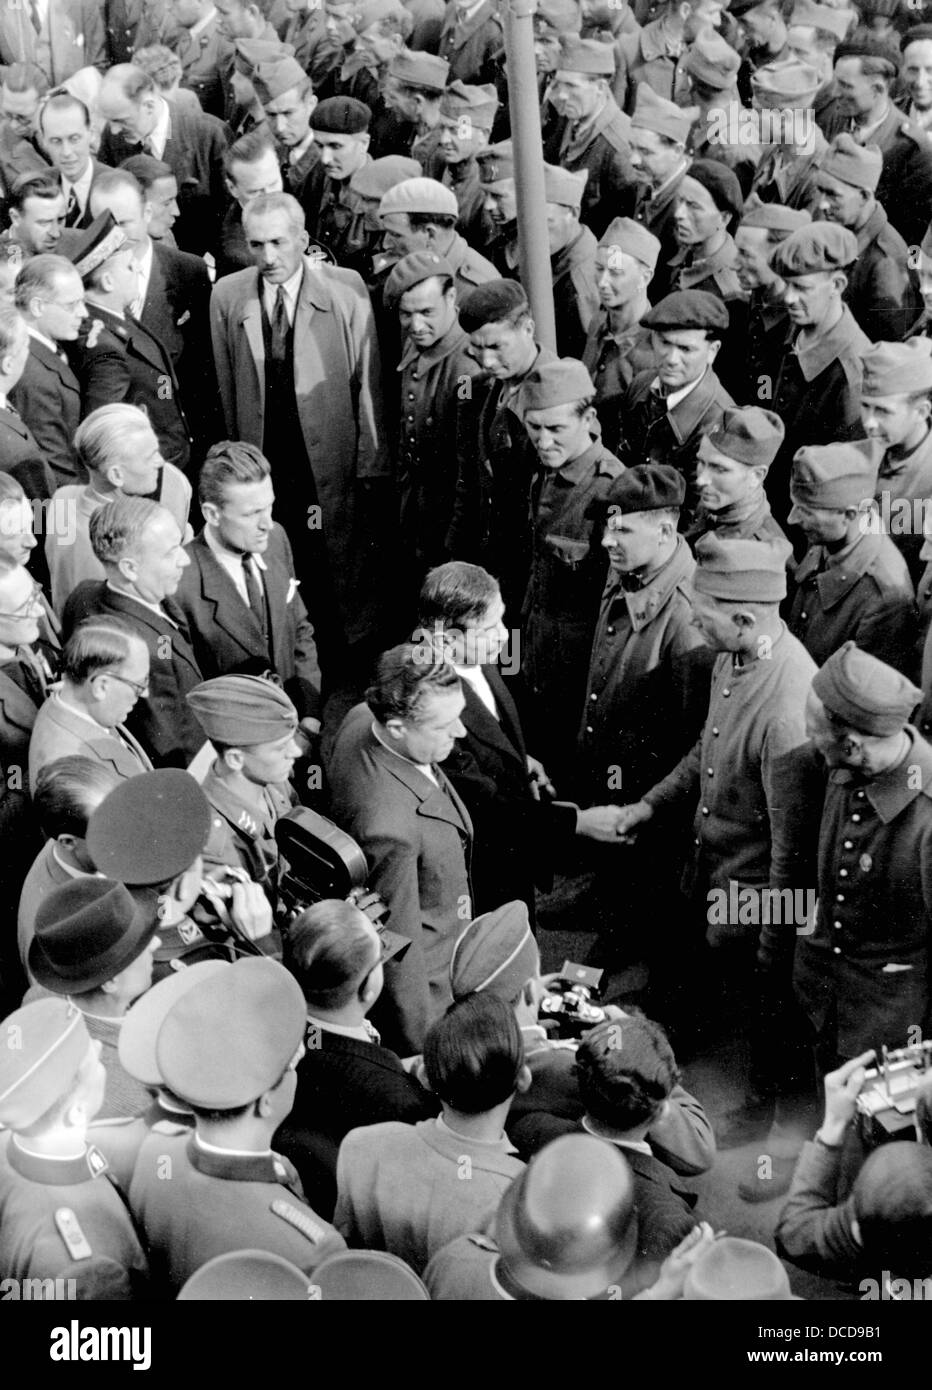 Exchange of French prisoners of war in Germany with French civilian workers in 1942 (so-called 'Relève') - here: French Prime Minister Pierre Laval welcomes the returning prisoners of war at the train station in Compiègne. Fotoarchiv für Zeitgeschichte Stock Photo